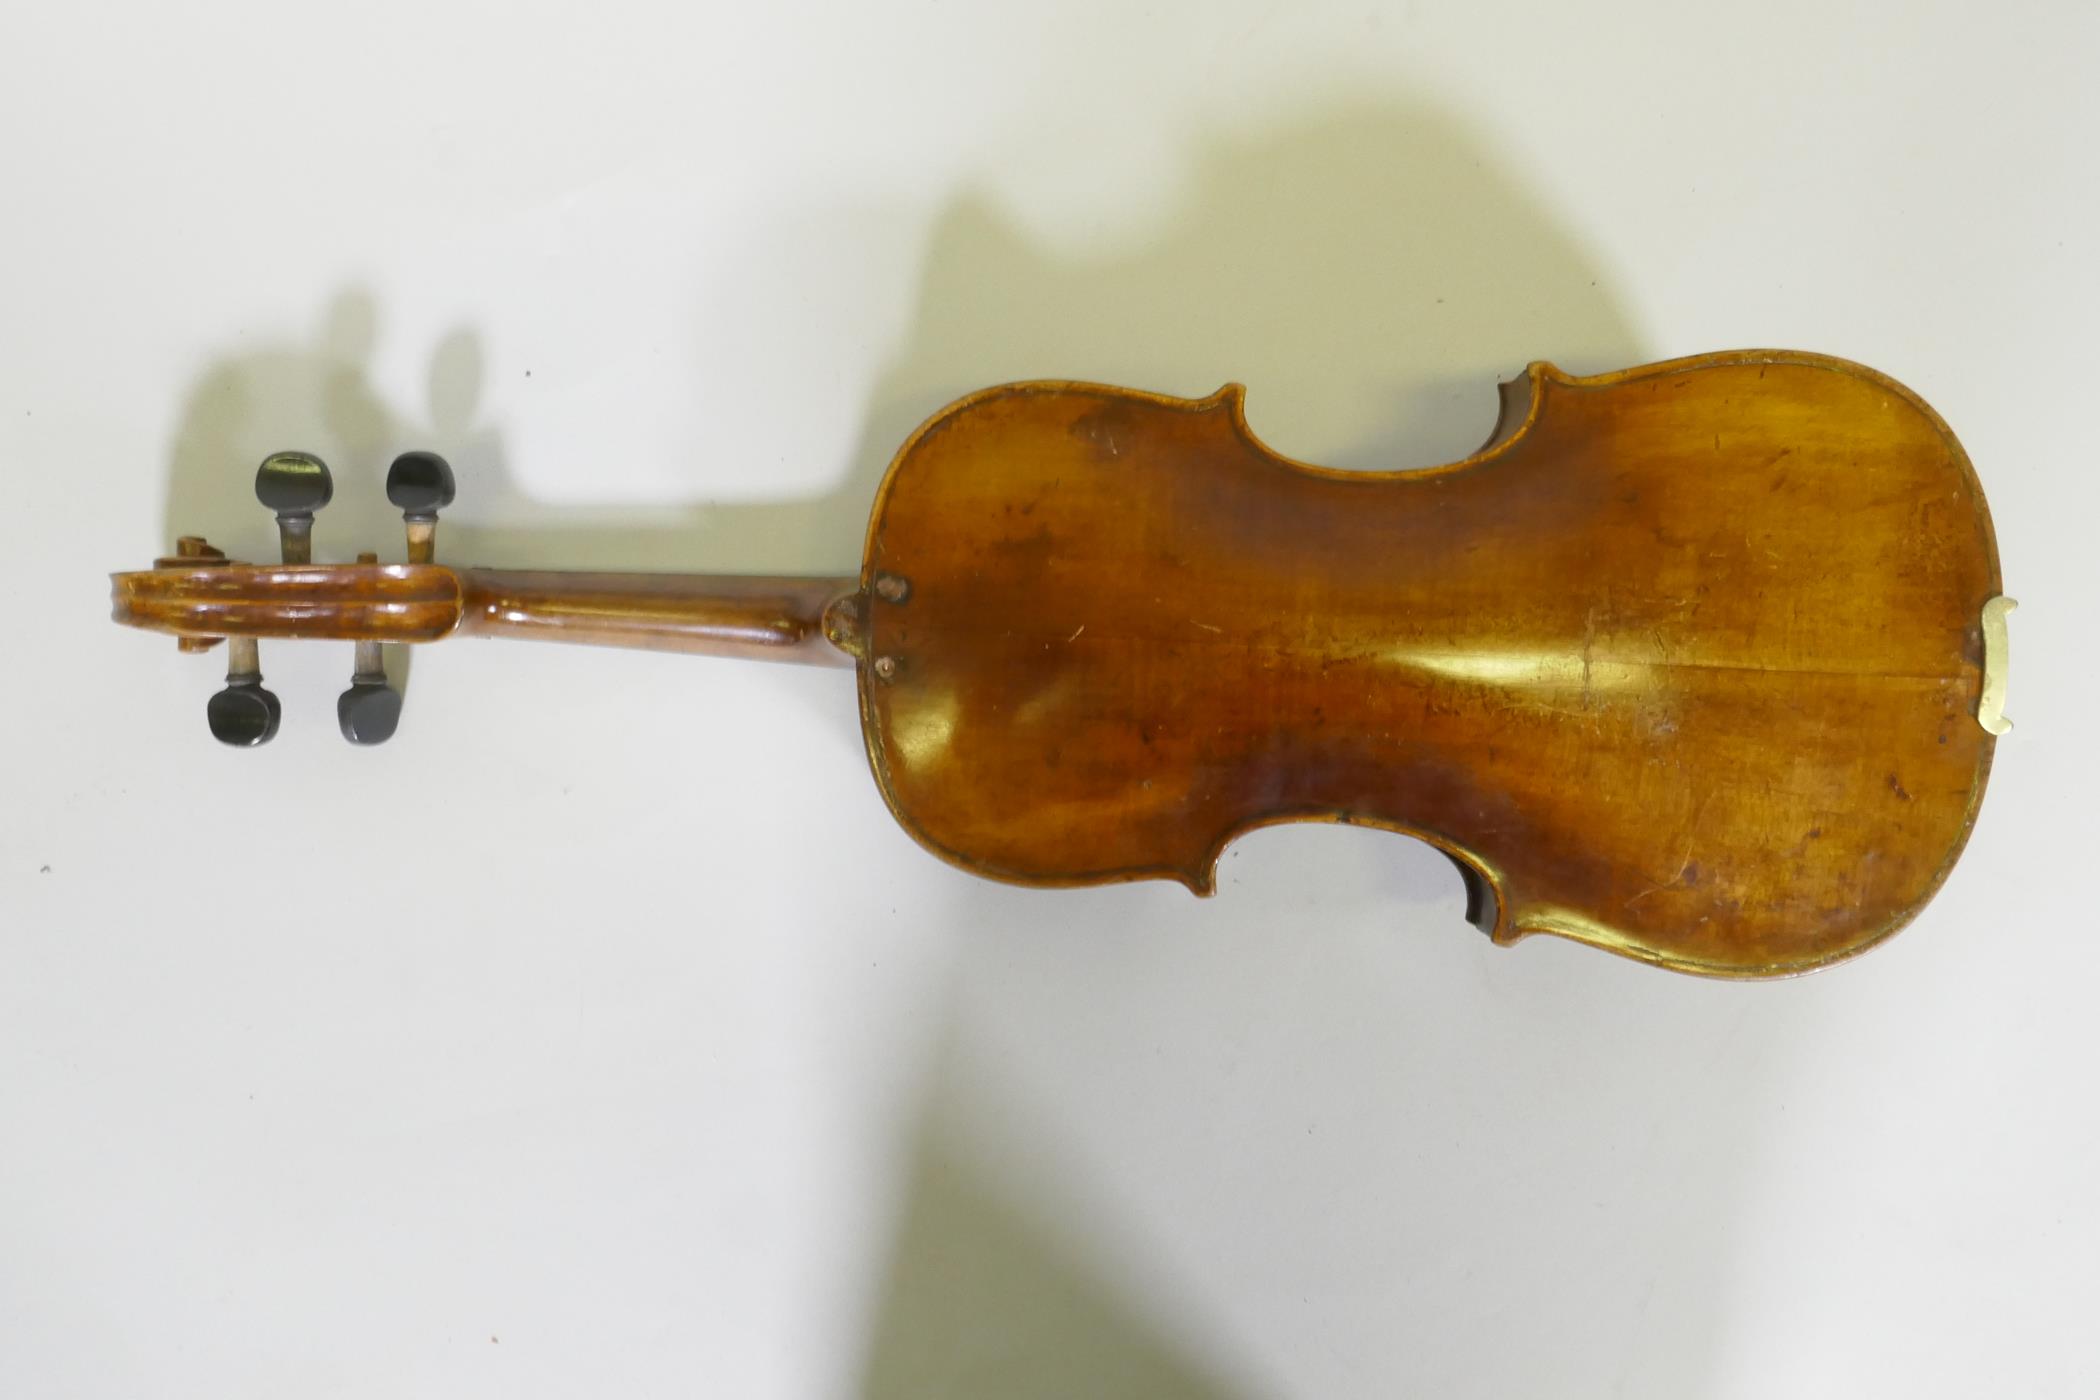 Early C20th full size violin stamped Hopf, with two piece back, 35.5cm long without button, and a - Image 4 of 11